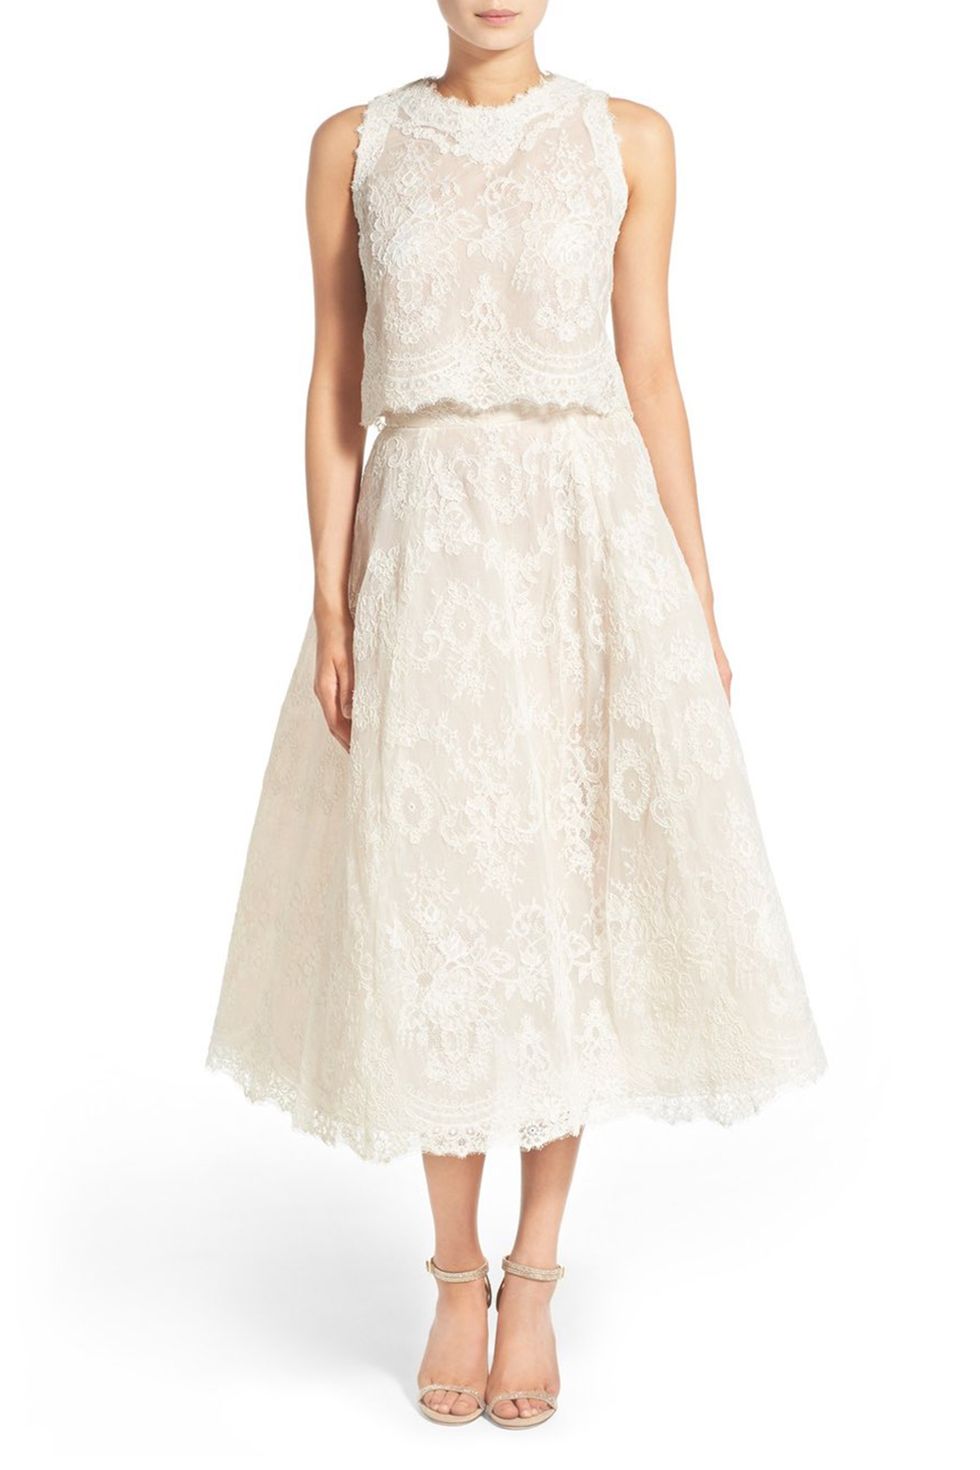 <p>Everybody likes a two-fer, and everybody likes an Audrey Hepburn reference even more.&nbsp;</p><p>$2,208, <a href="http://shop.nordstrom.com/s/embrdrd-lace-crop-top-skirt/4247466?origin=category-personalizedsort&amp;fashioncolor=SILK%20WHITE%2F%20NUDE" target="_blank" data-tracking-id="recirc-text-link">shop.nordstrom.com</a>.</p>